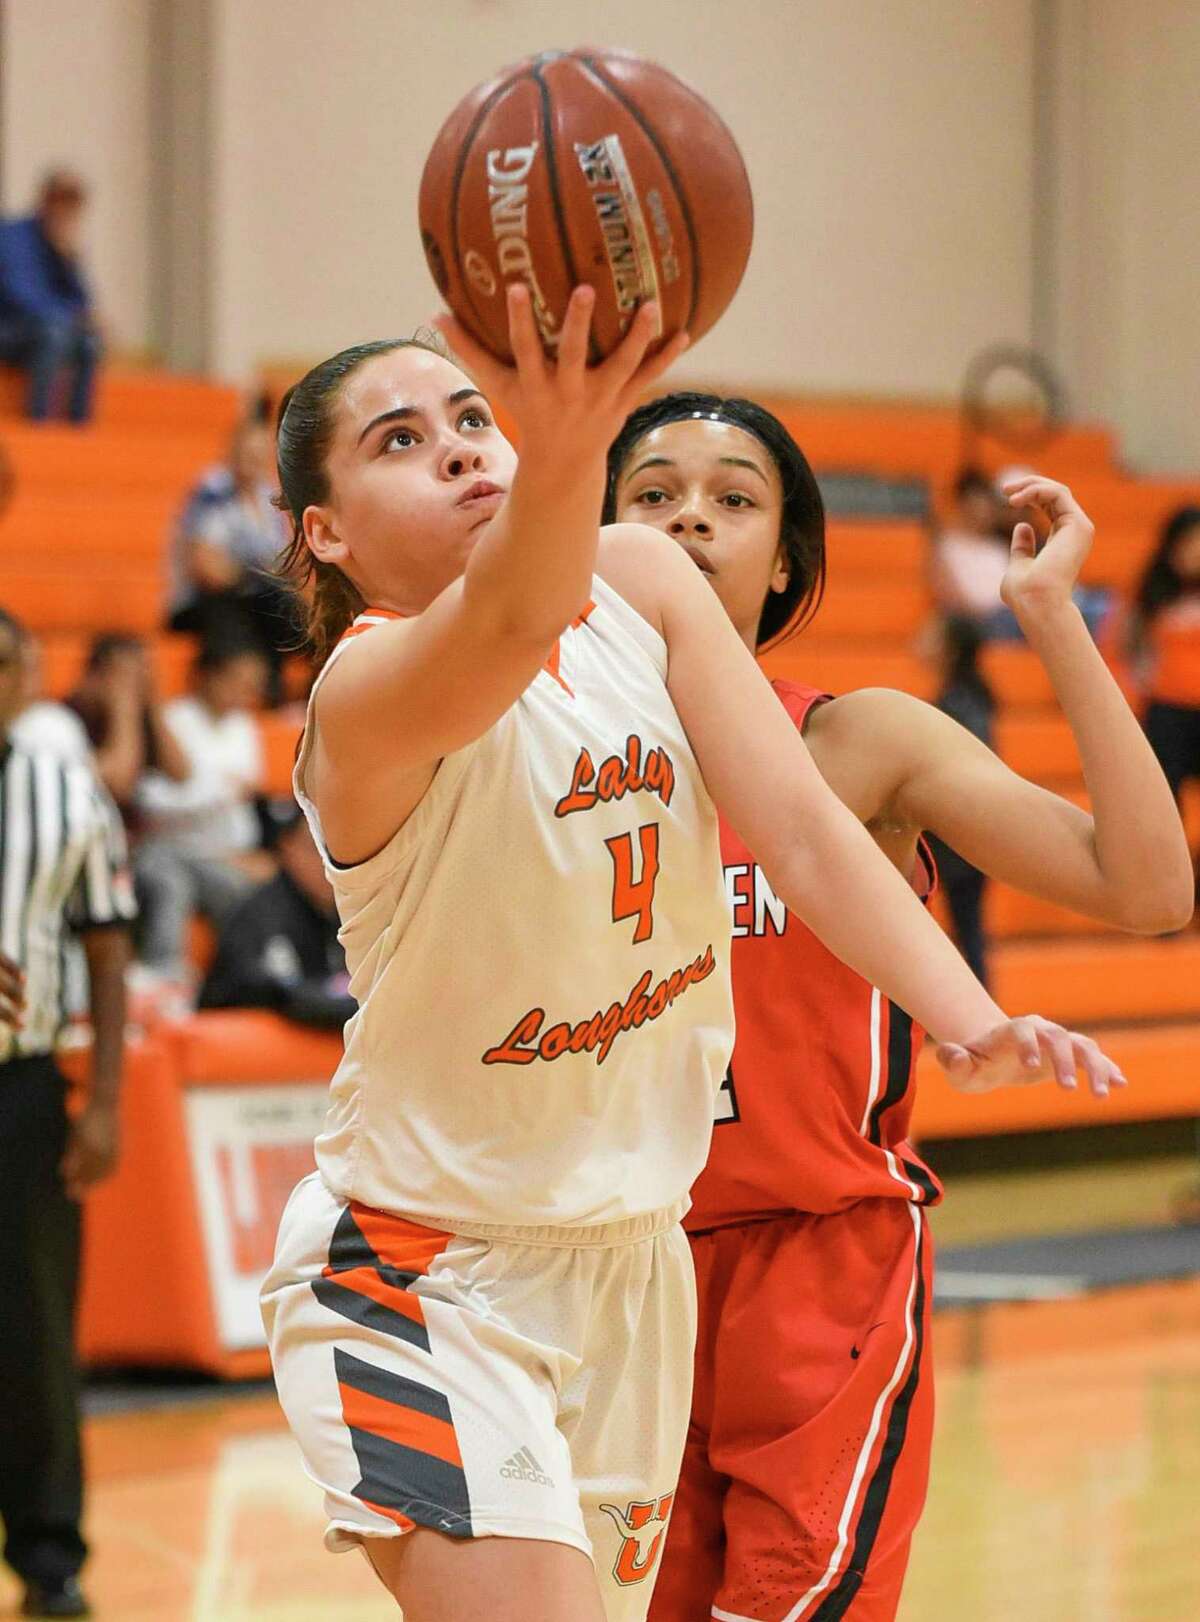 Evelyn Quiroz averaged 13 points, 5 rebounds, 2.5 assists and 2.6 steals per game in her senior season at United.